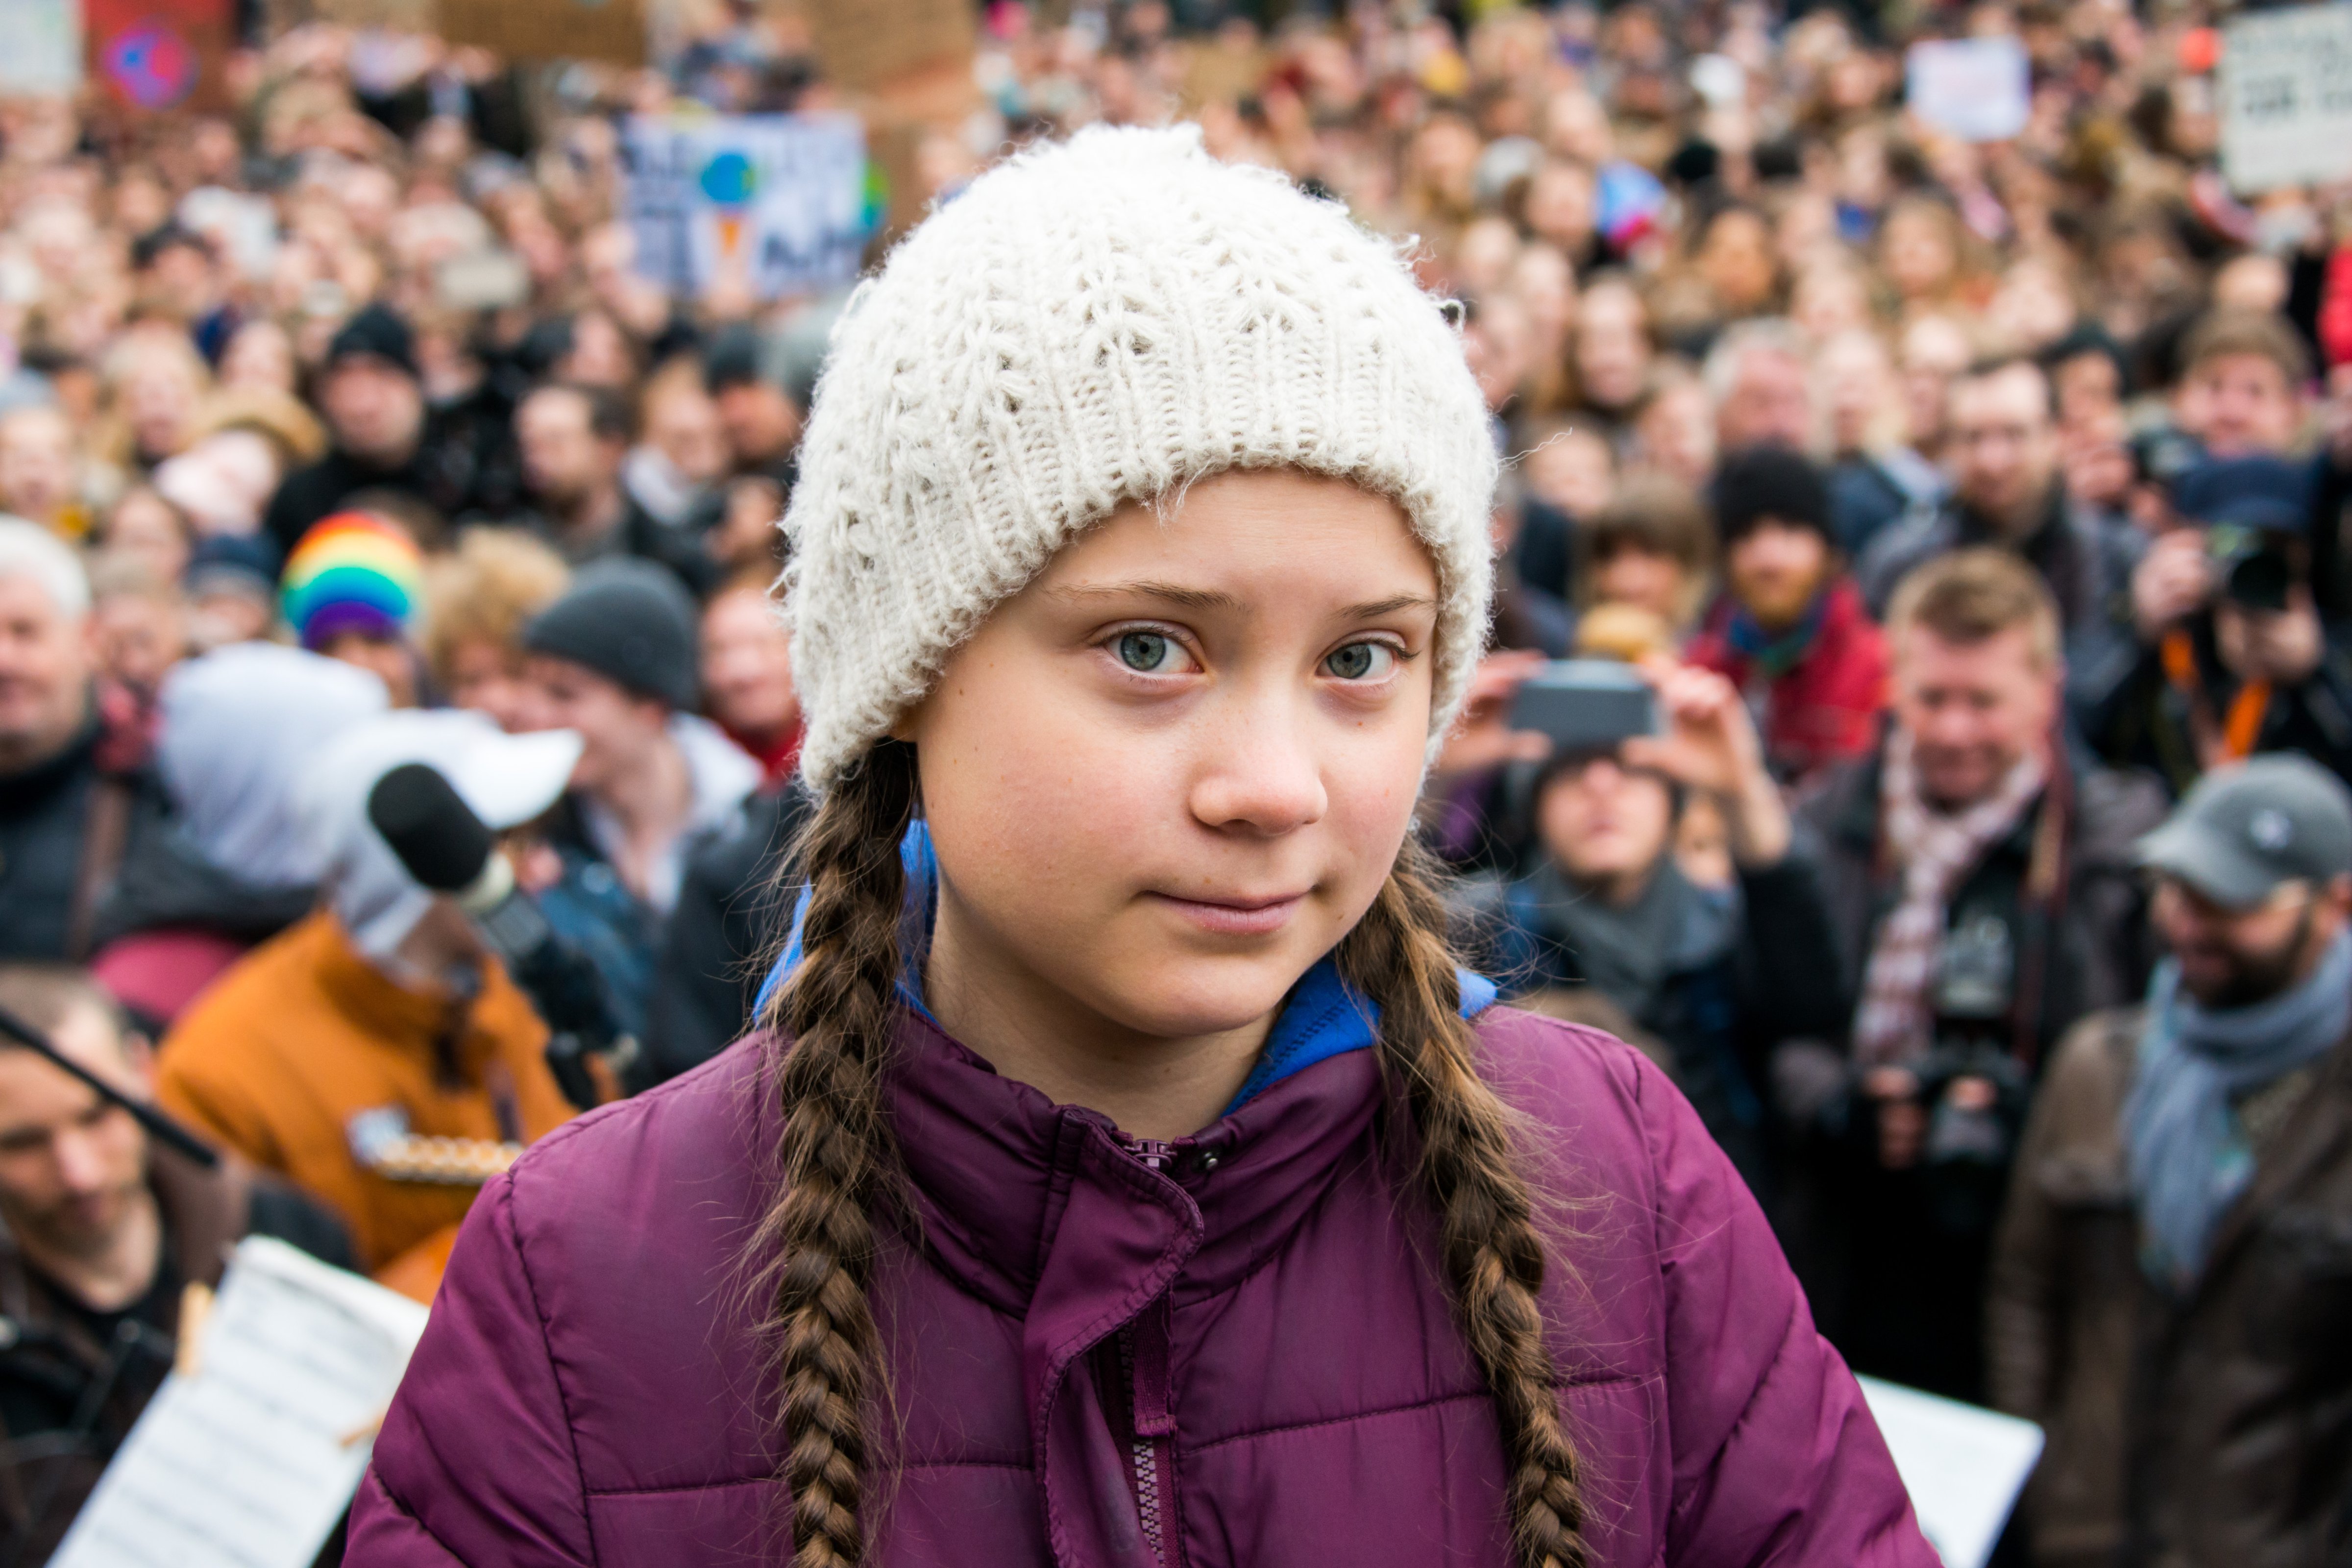 Greta Thunberg, climate activist, stands on a stage during a rally at the town hall market in Hamburg, Germany, on Mar. 1, 2019. (Daniel Bockwoldt—Getty Images)